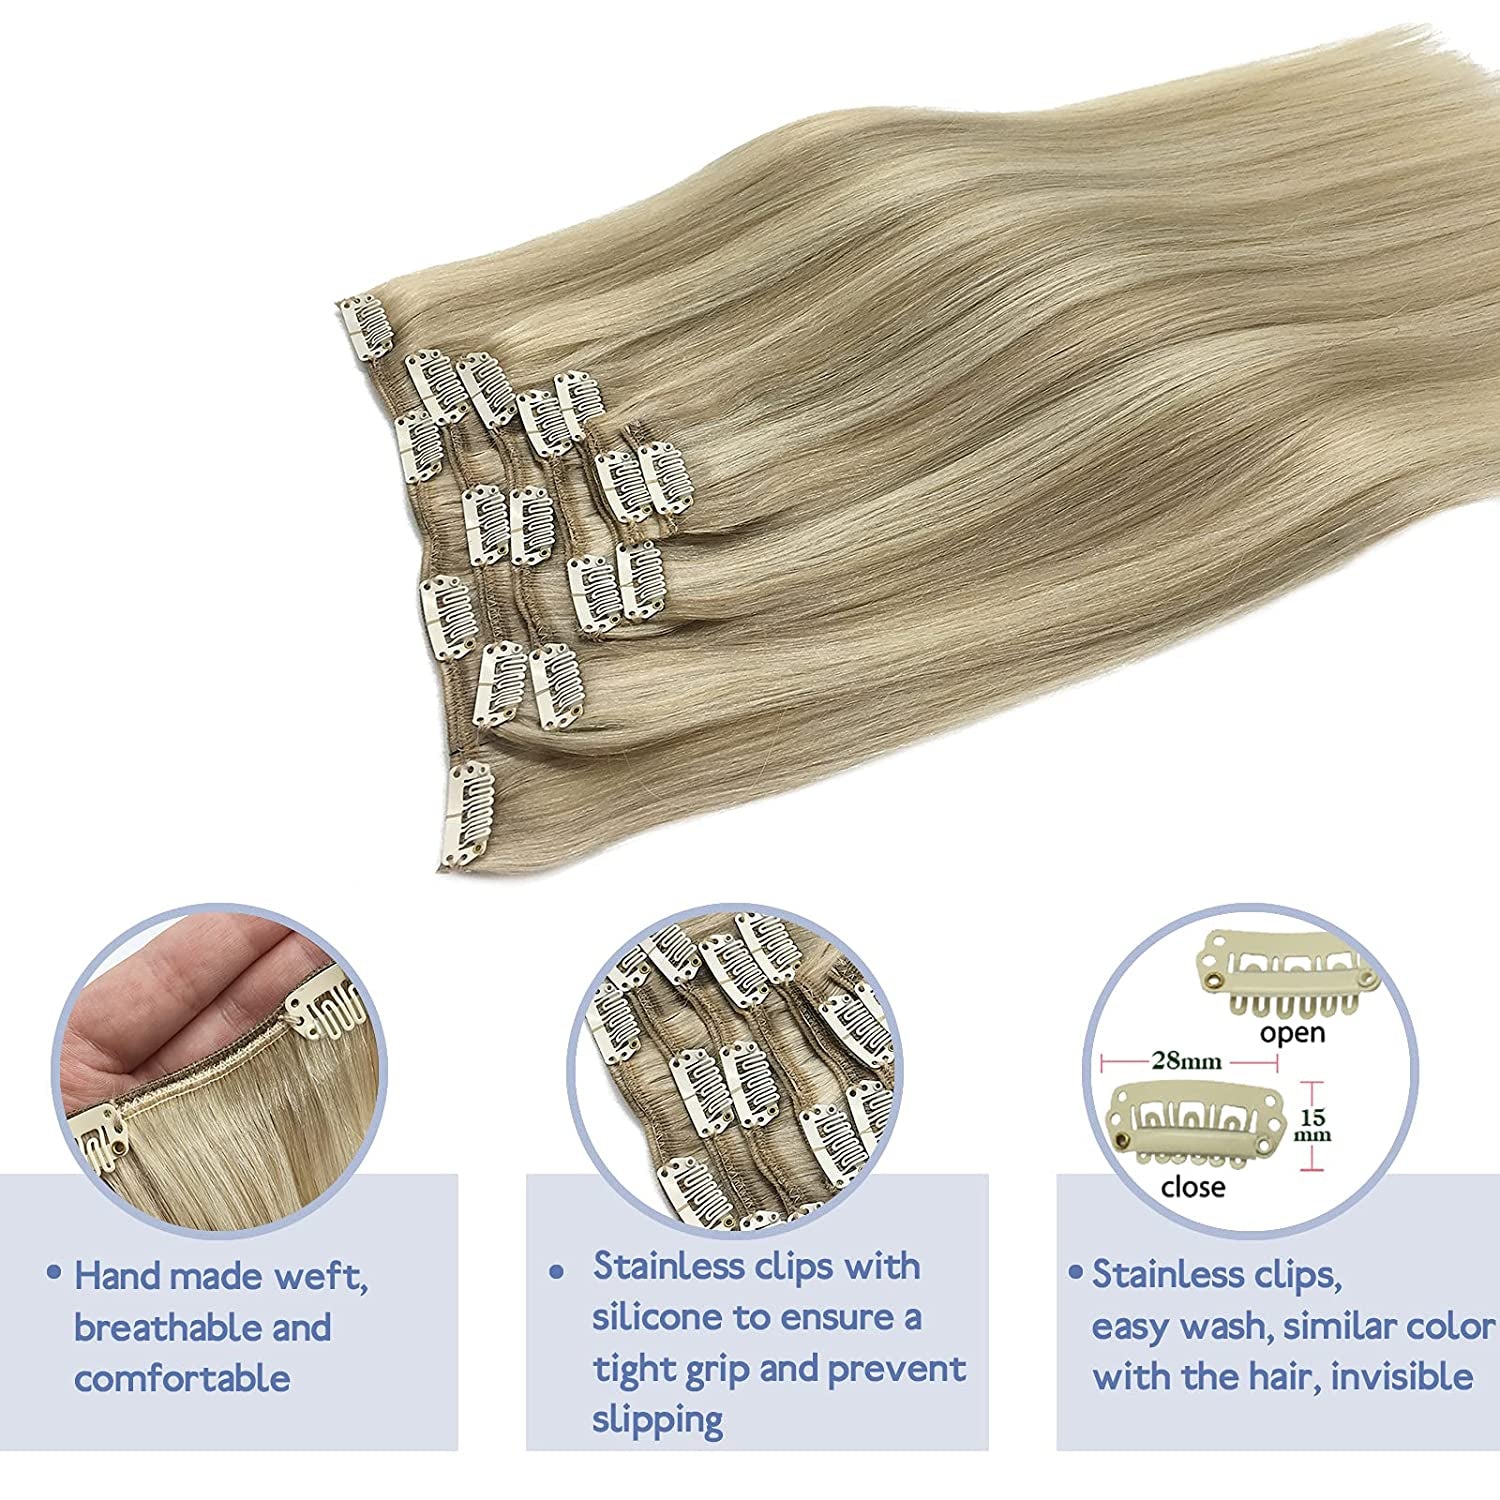 GOO GOO Hair Extensions, Clip in Hair Extensions Ash Blonde Highlighted Platinum Blonde 120G 7Pcs 14 Inch Remy Human Hair Extensions Straight Thick Natural Hair Extensions for Women